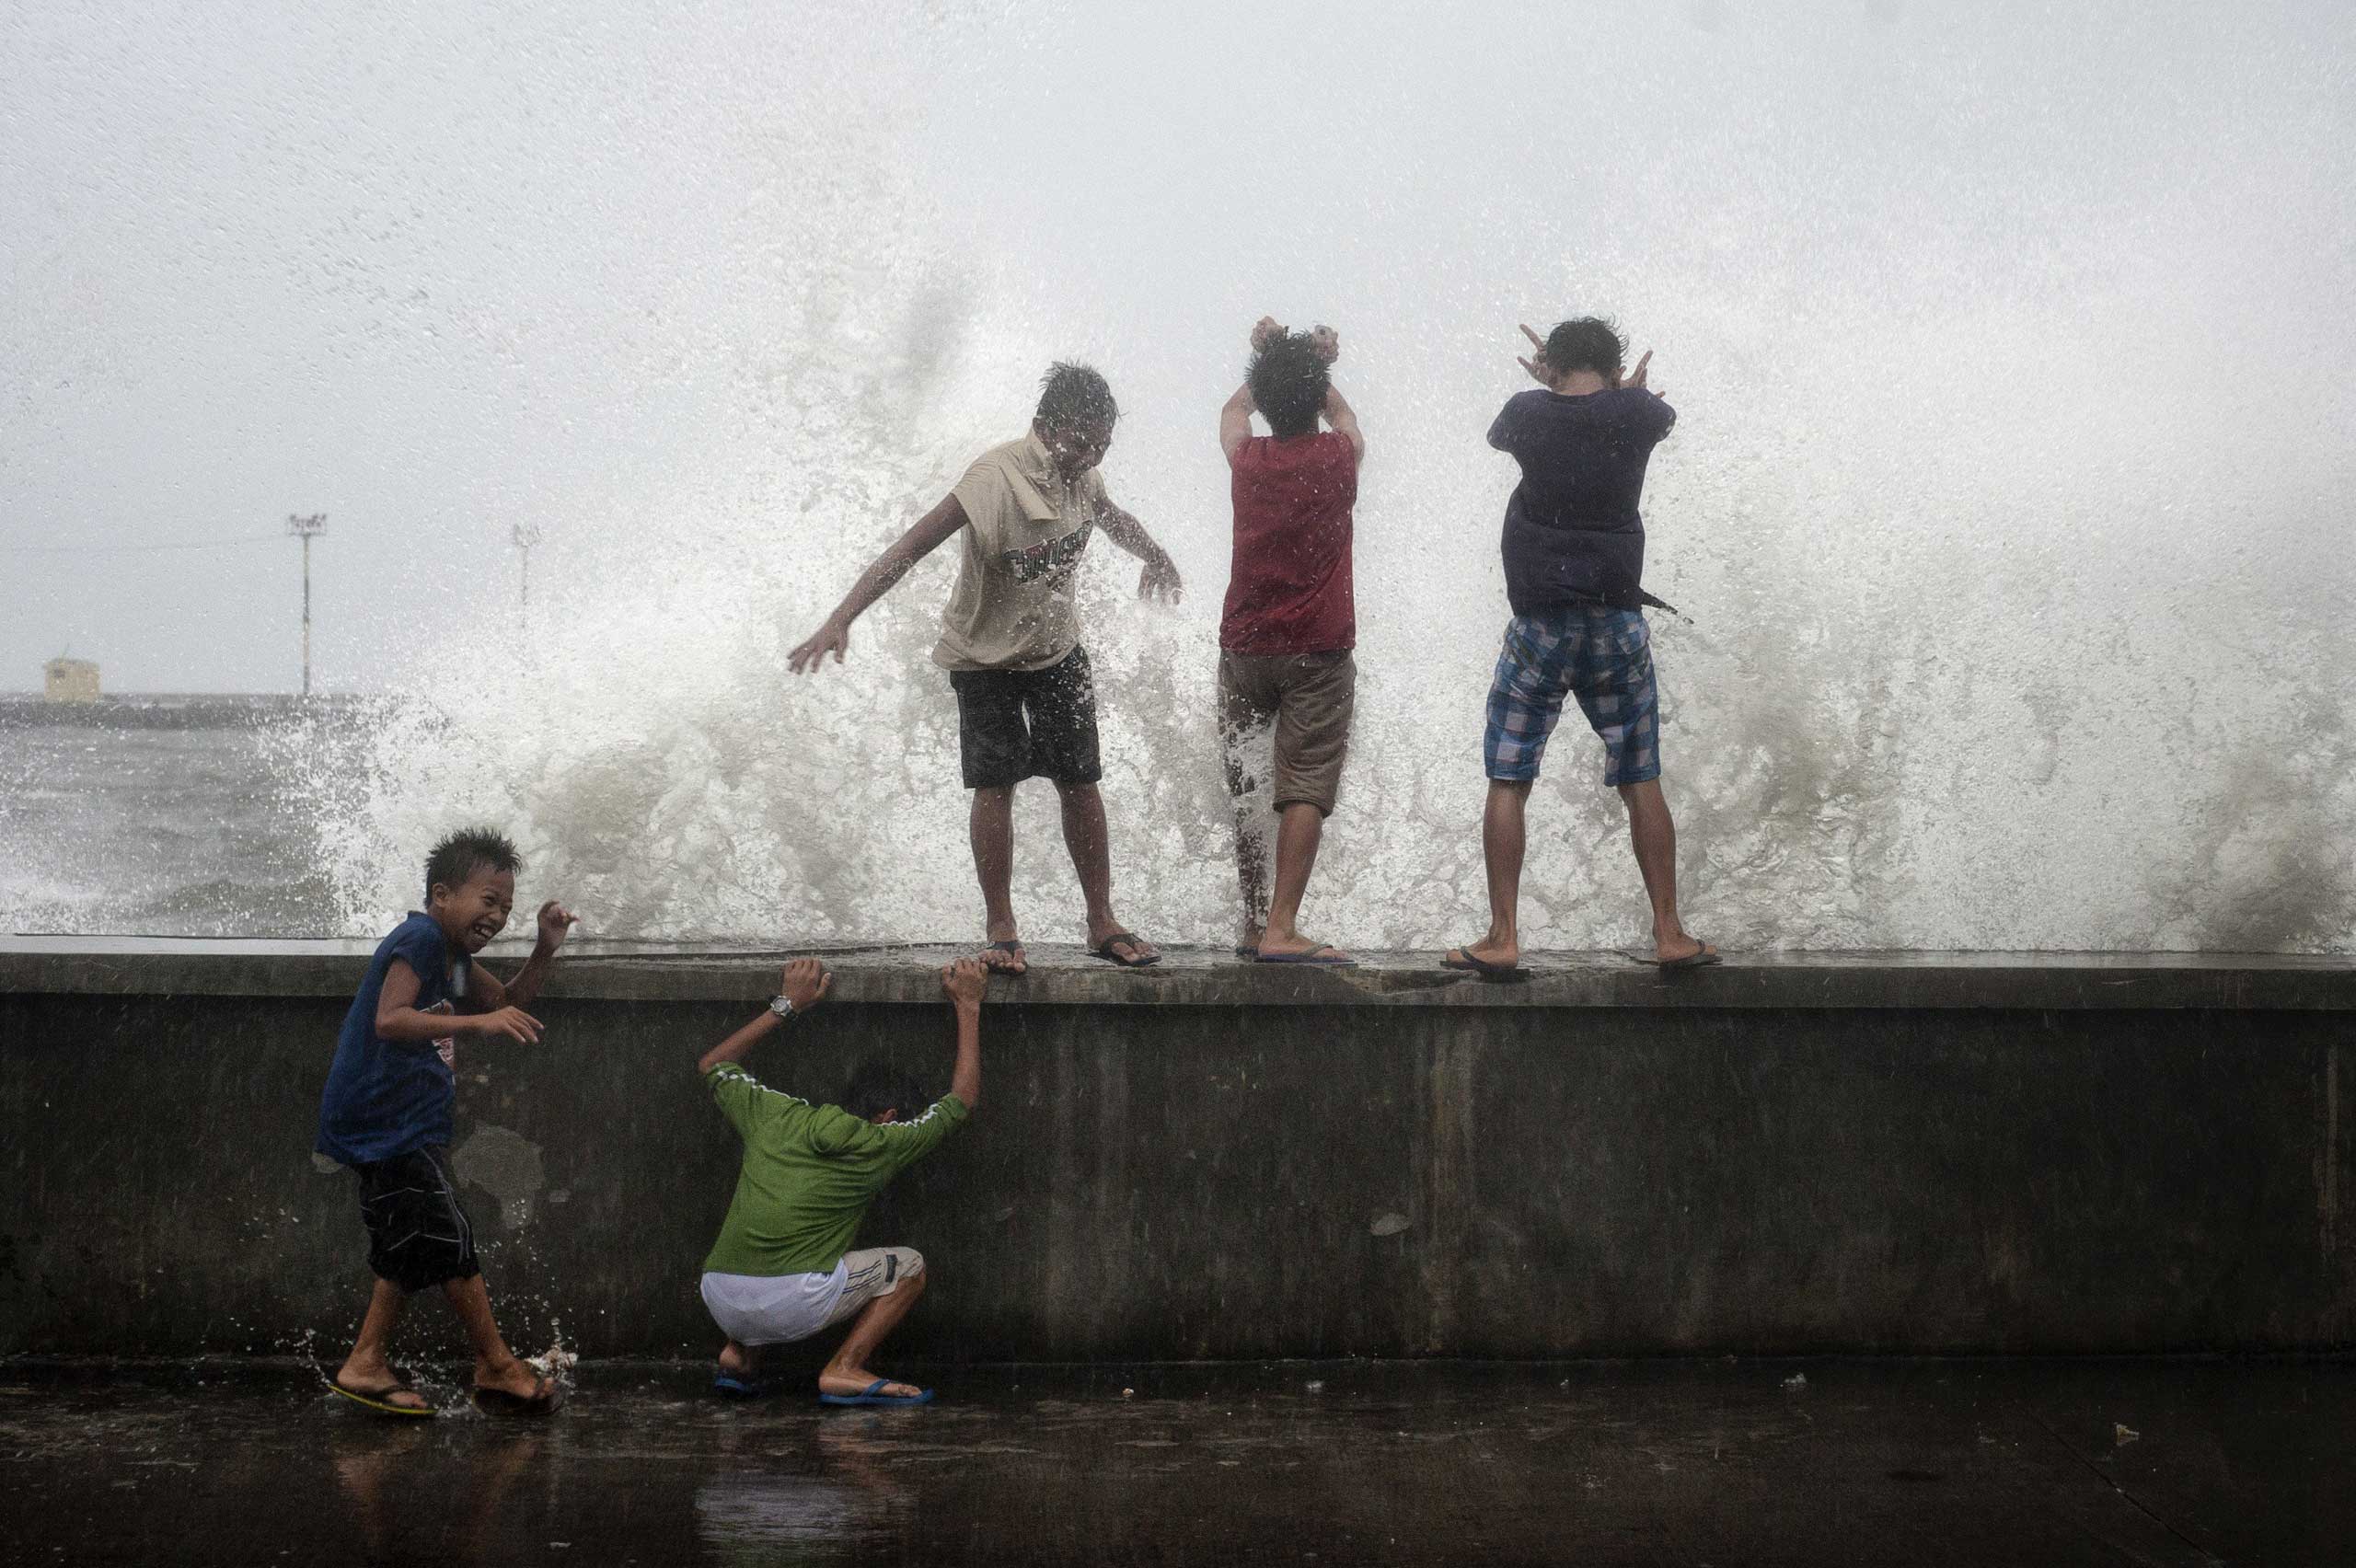 Dec. 7, 2014. Children play at a wharf in Legazpi, Philippines. As Typhoon Hagupit churned across the Philippines, residents of the eastern part of the island nation expressed relief that they had joined the hundreds of thousands who evacuated to safer ground.